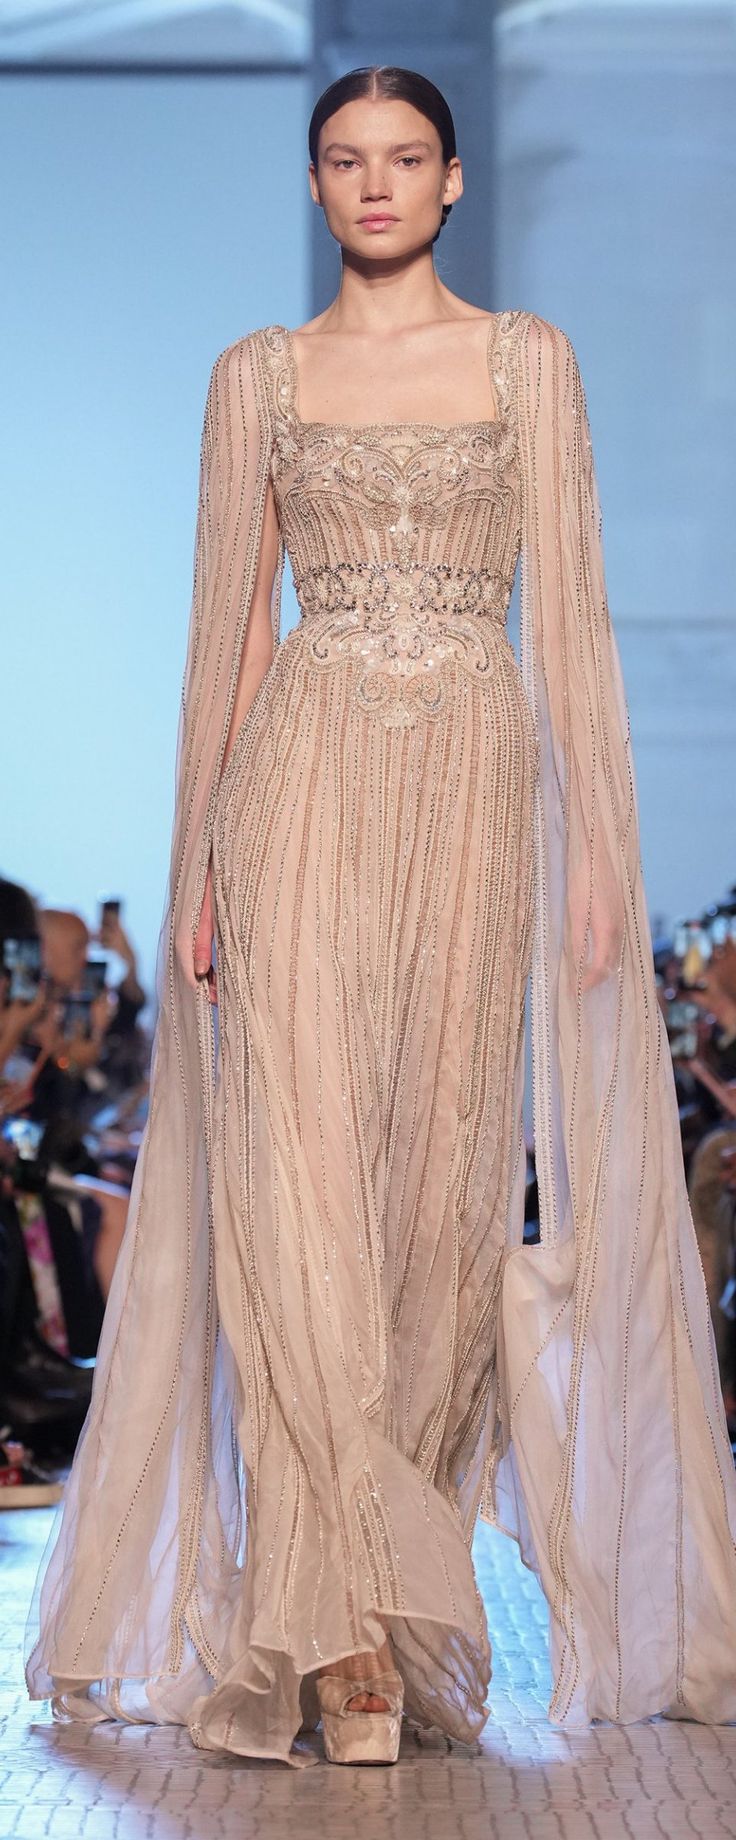 a model walks down the runway in a beige gown with sheer sleeves and an embellished cape